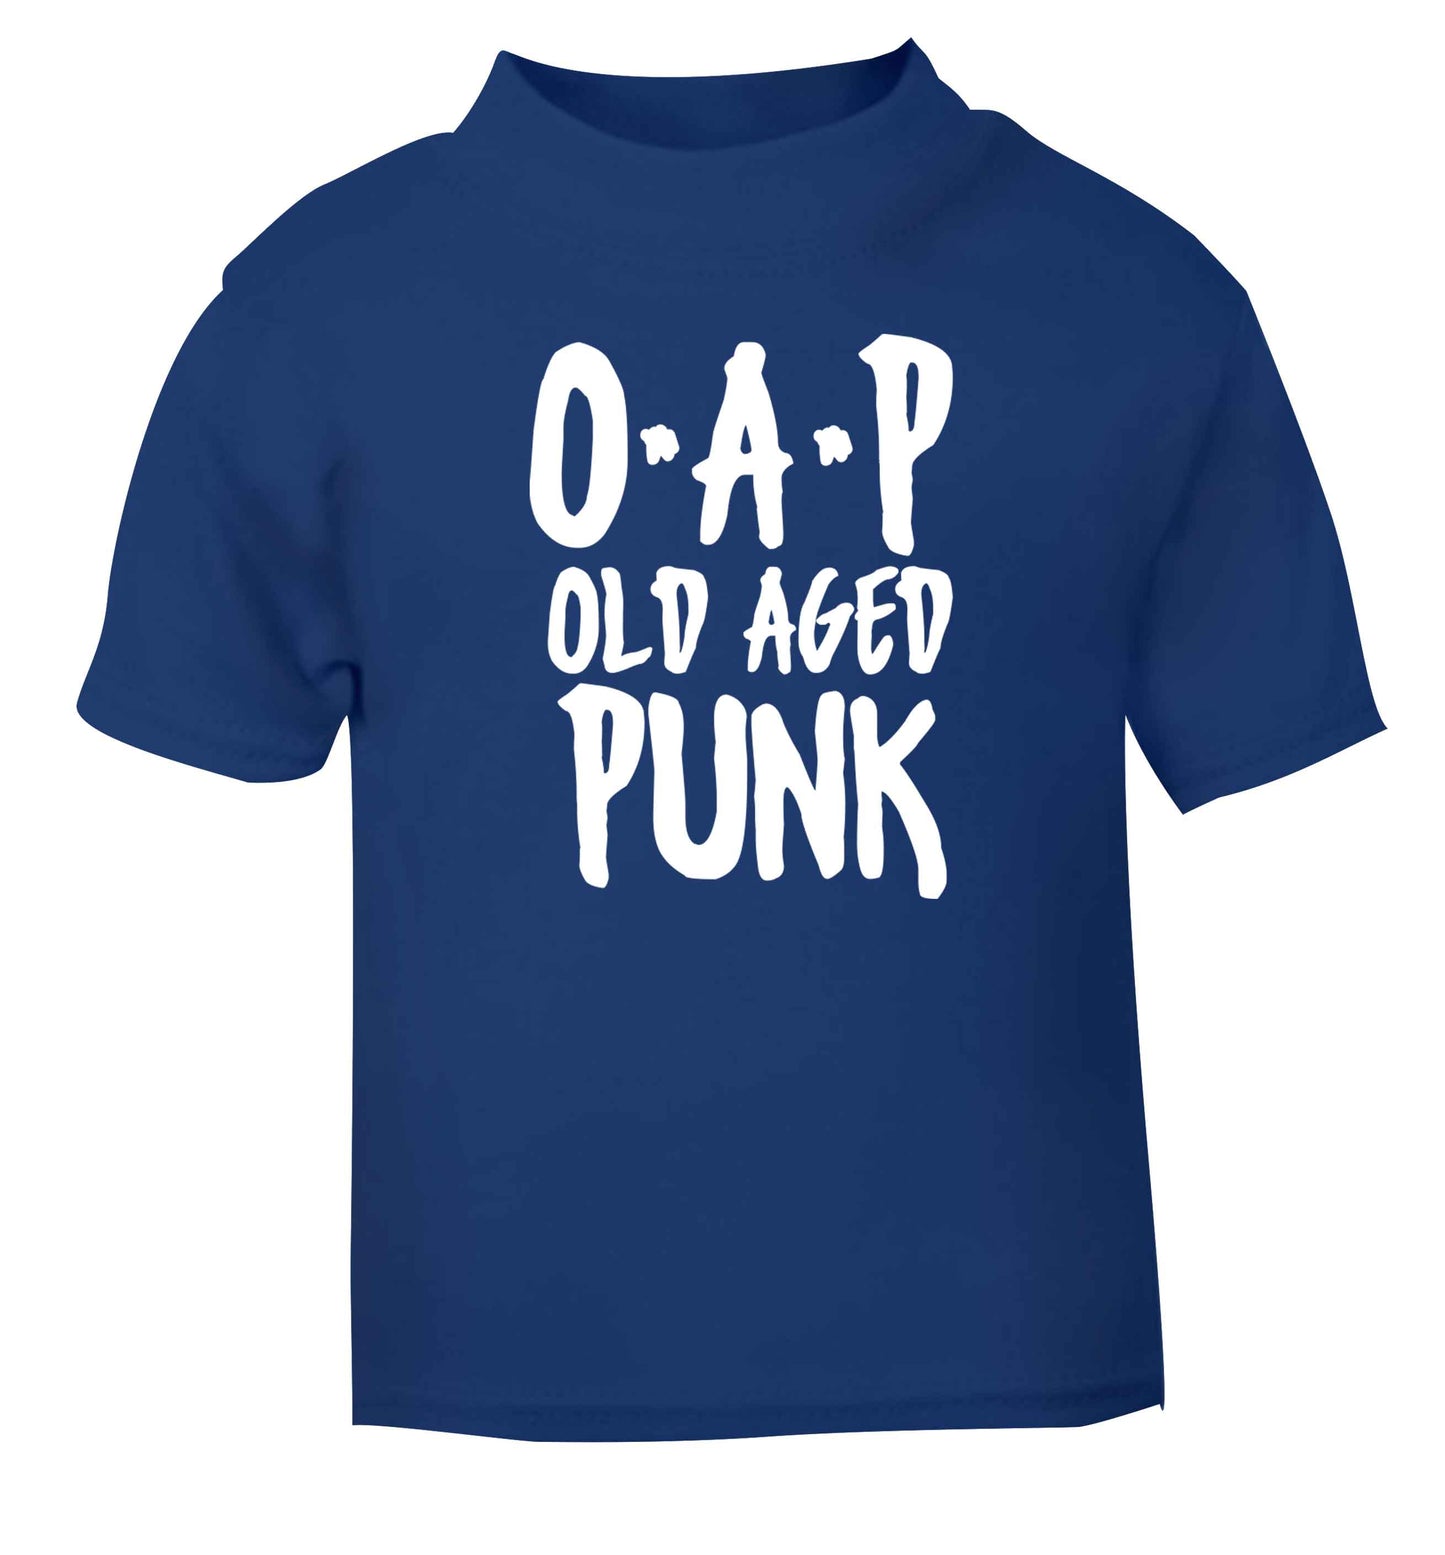 O.A.P Old Age Punk blue Baby Toddler Tshirt 2 Years